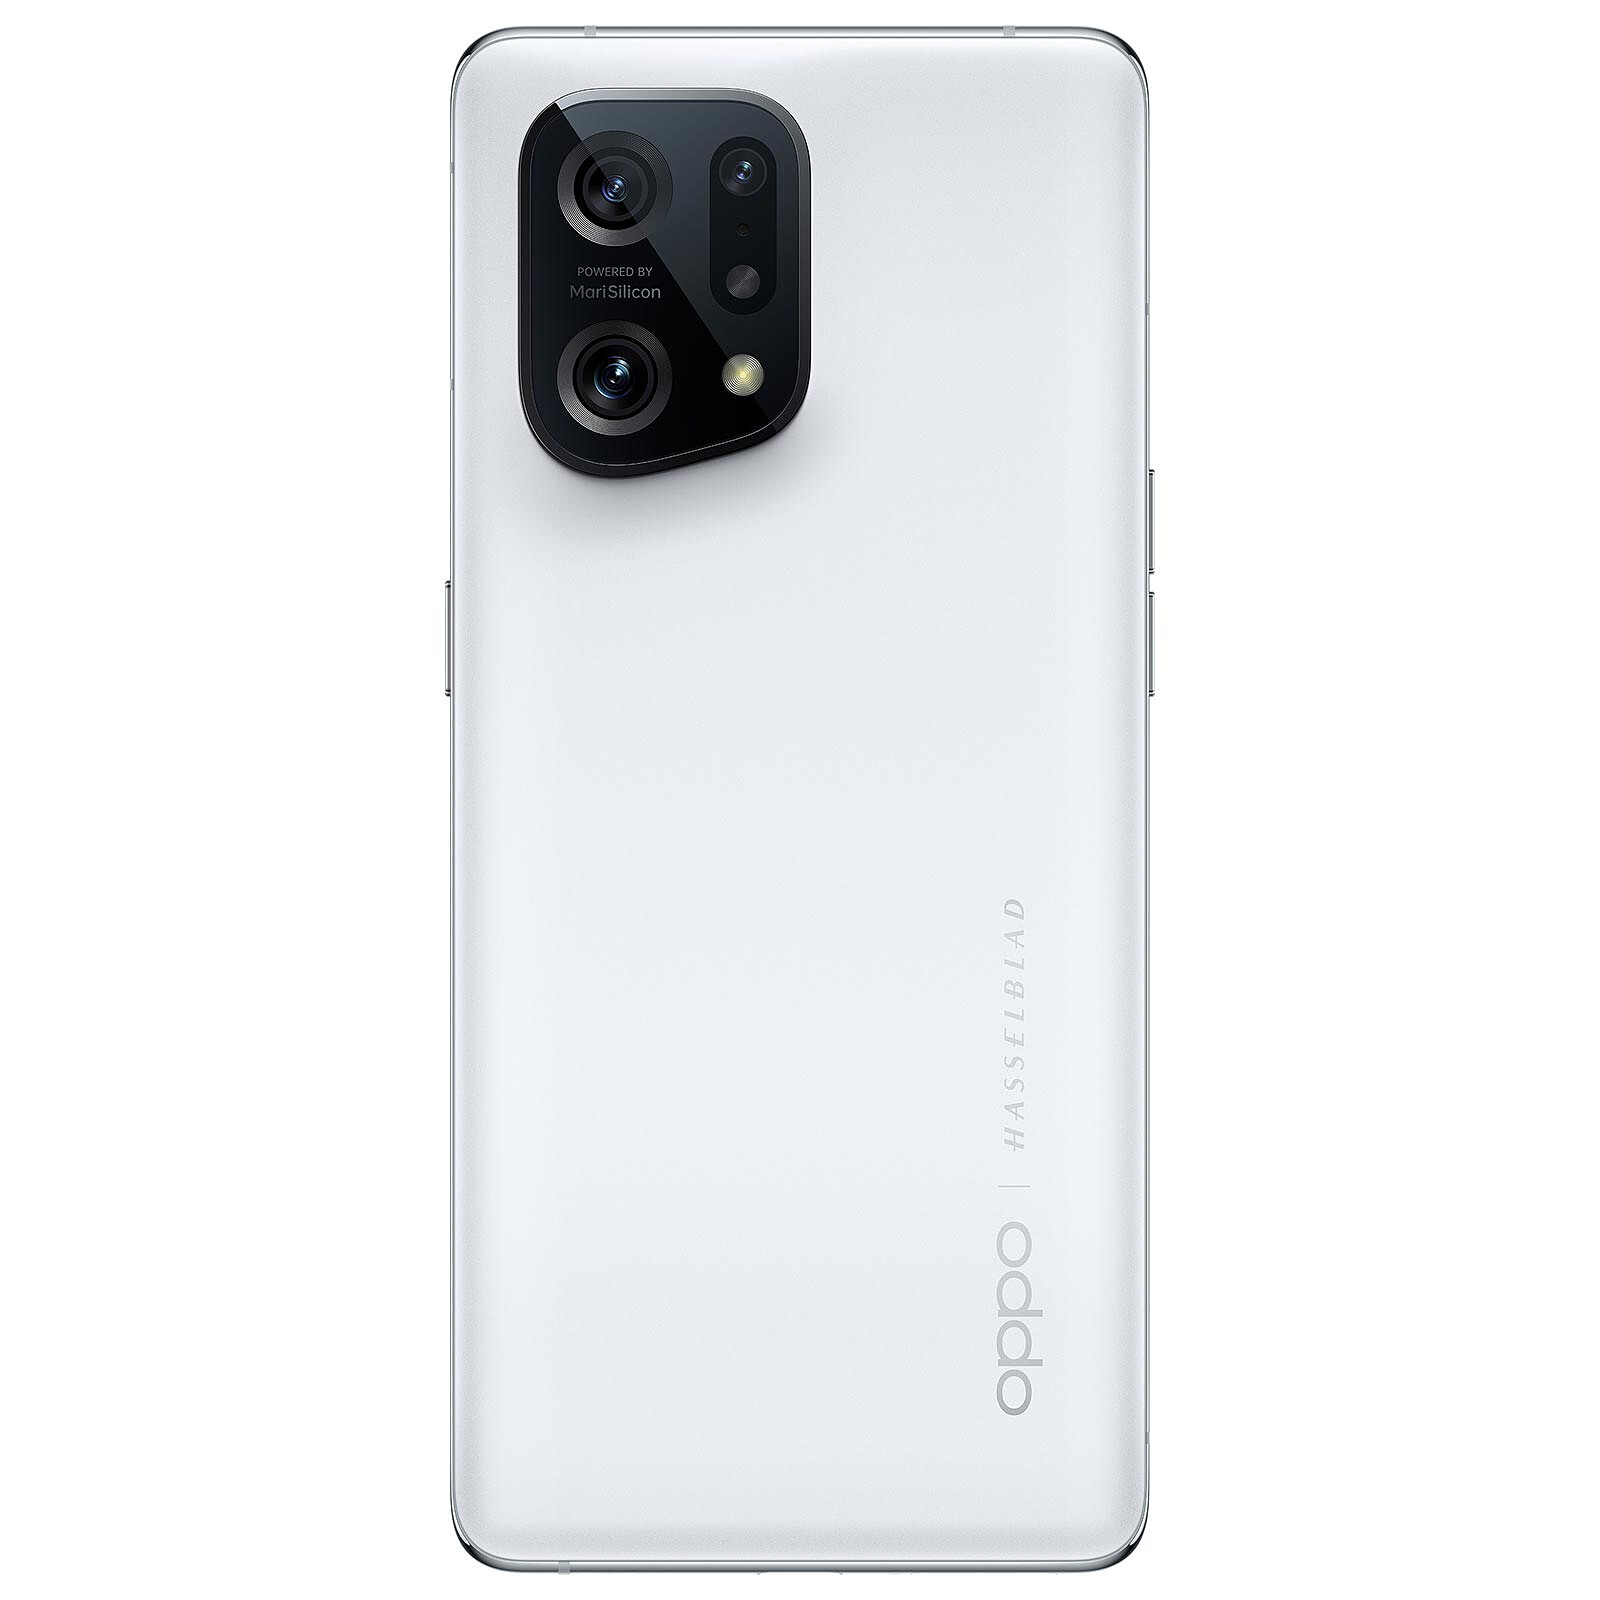 OPPO Find X5 5G White - Mobile phone & smartphone - LDLC 3-year warranty